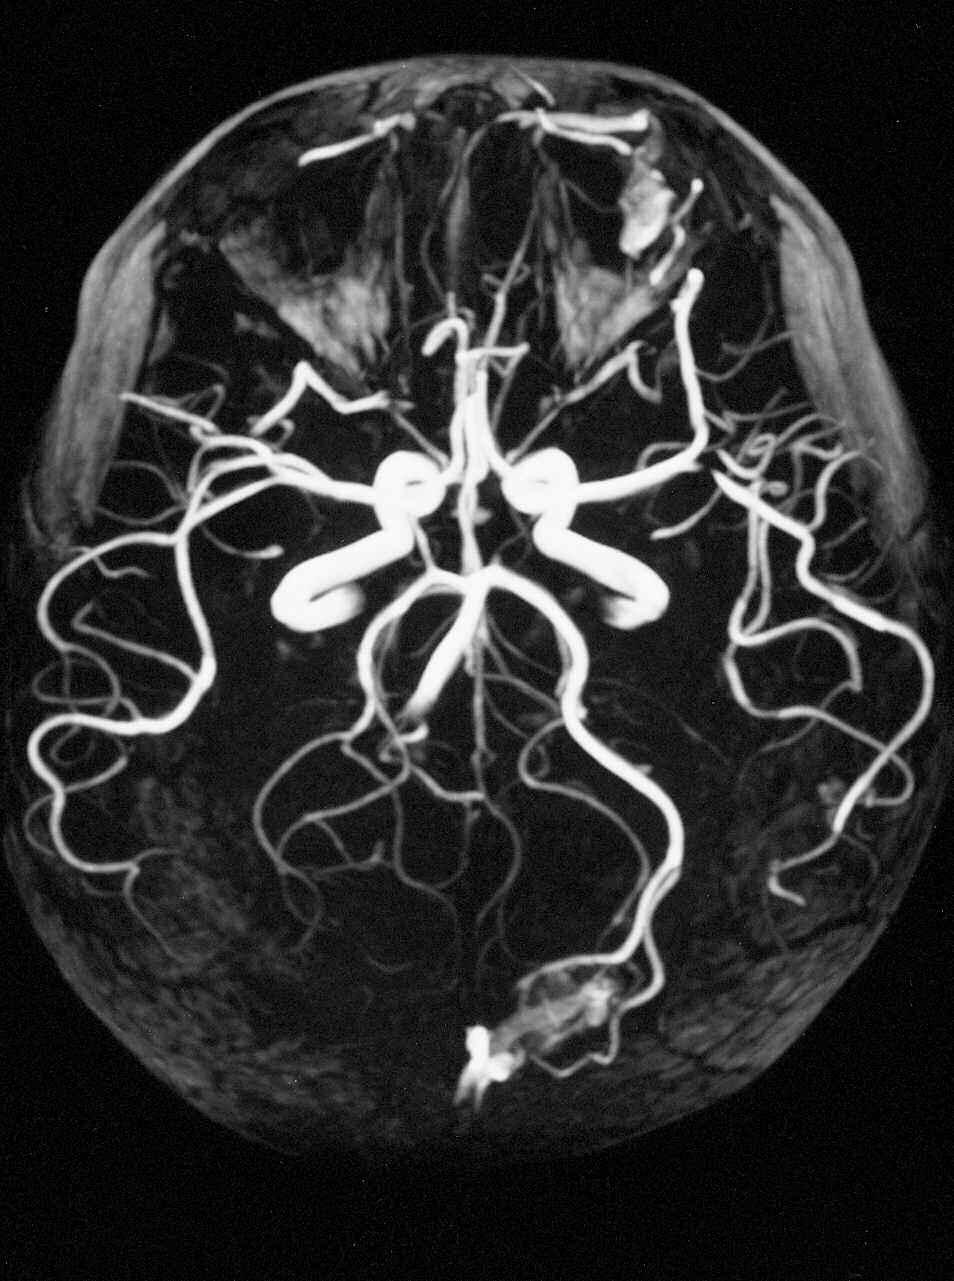 Interventional Neuroradiology 8: 37-44, 2002 tary occurrence, while more recent literature has shown a widespread angiodysplasia associated with this syndrome.